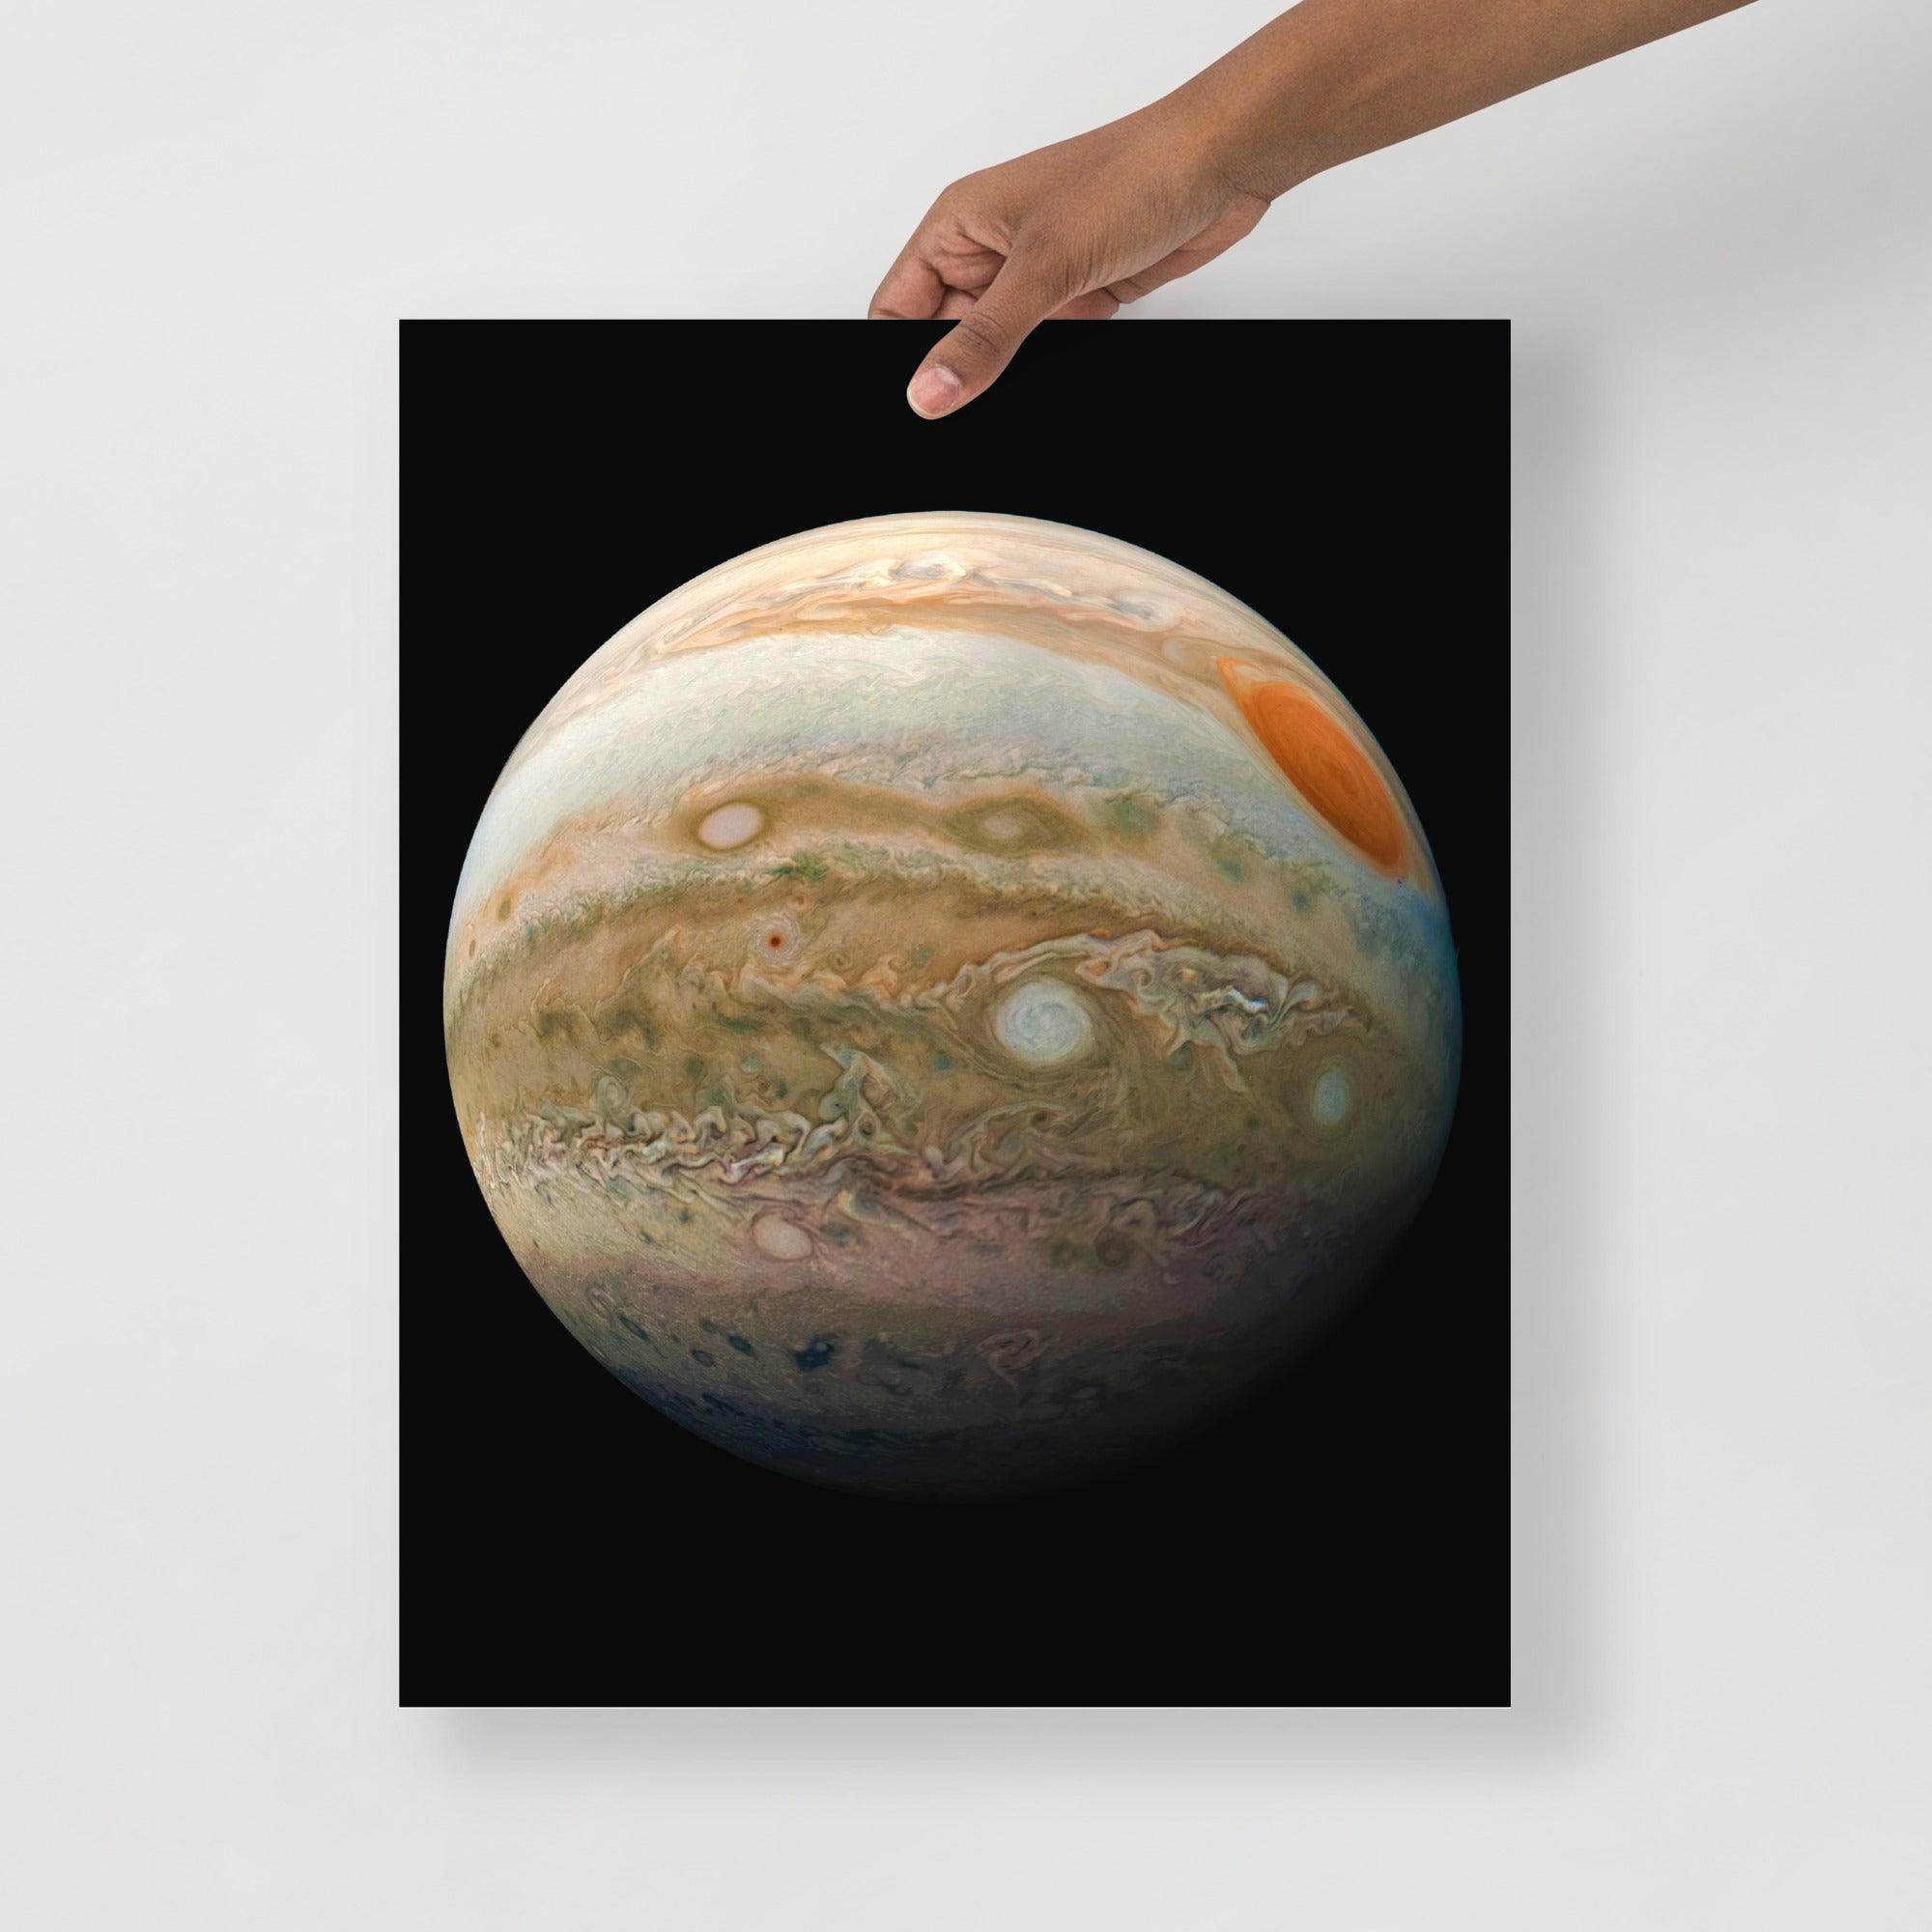 A Planet Jupiter From the Juno Spacecraft poster on a plain backdrop in size 16x20”.